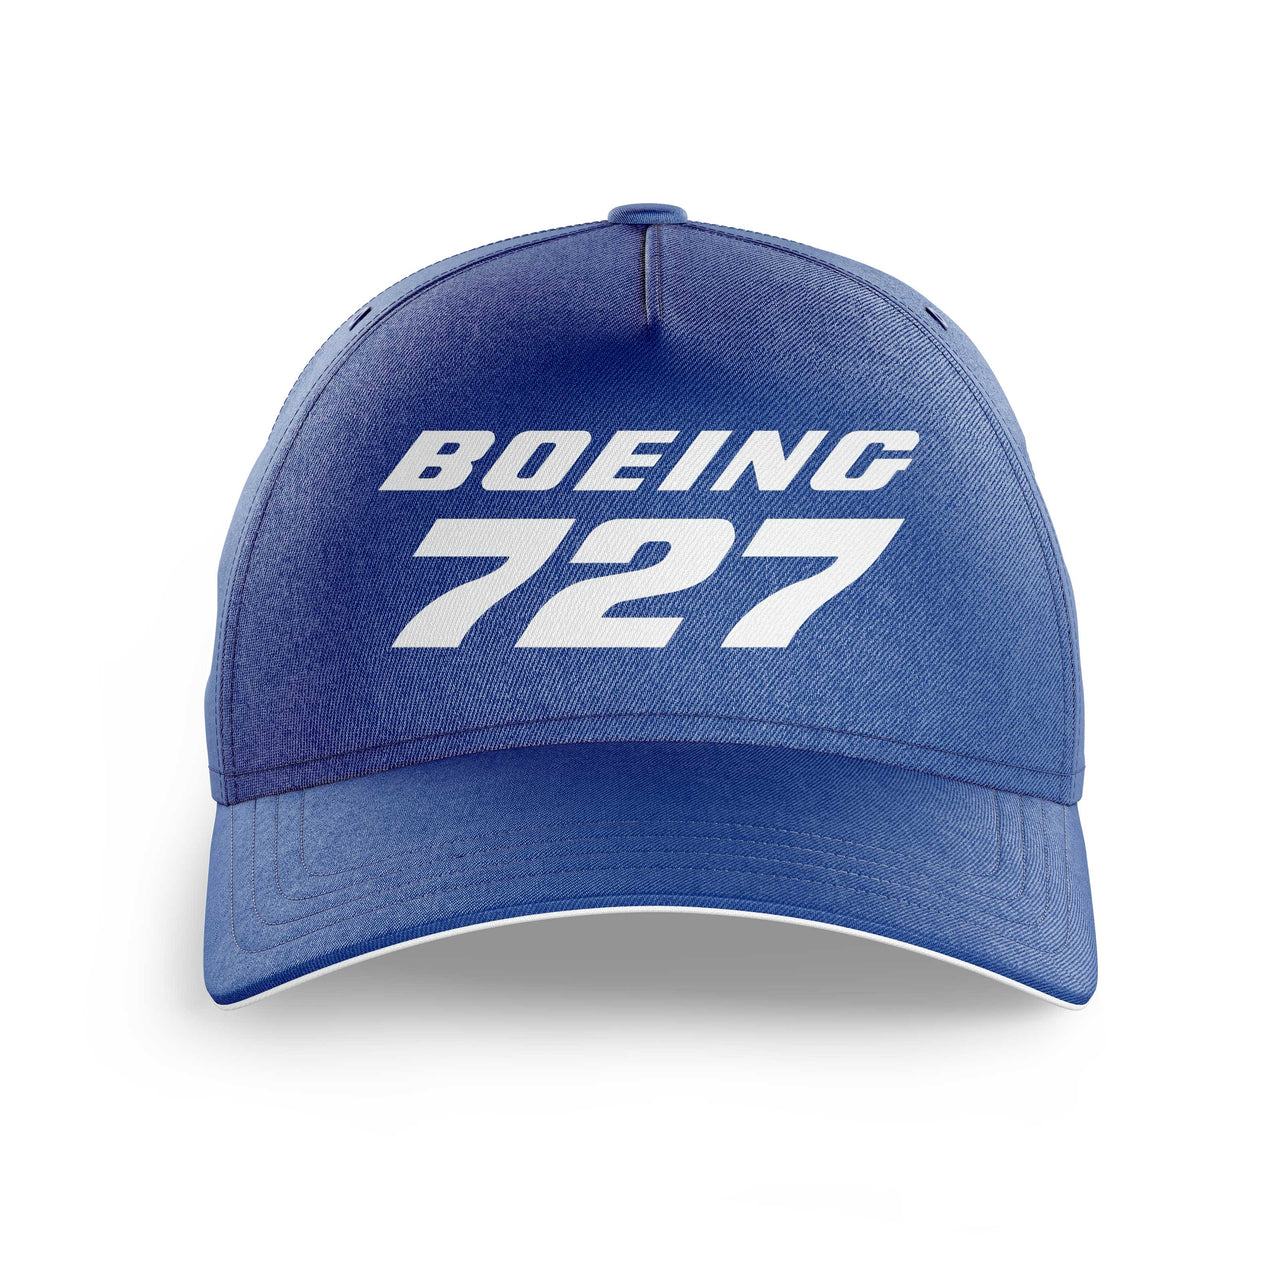 Boeing 727 & Text Printed Hats